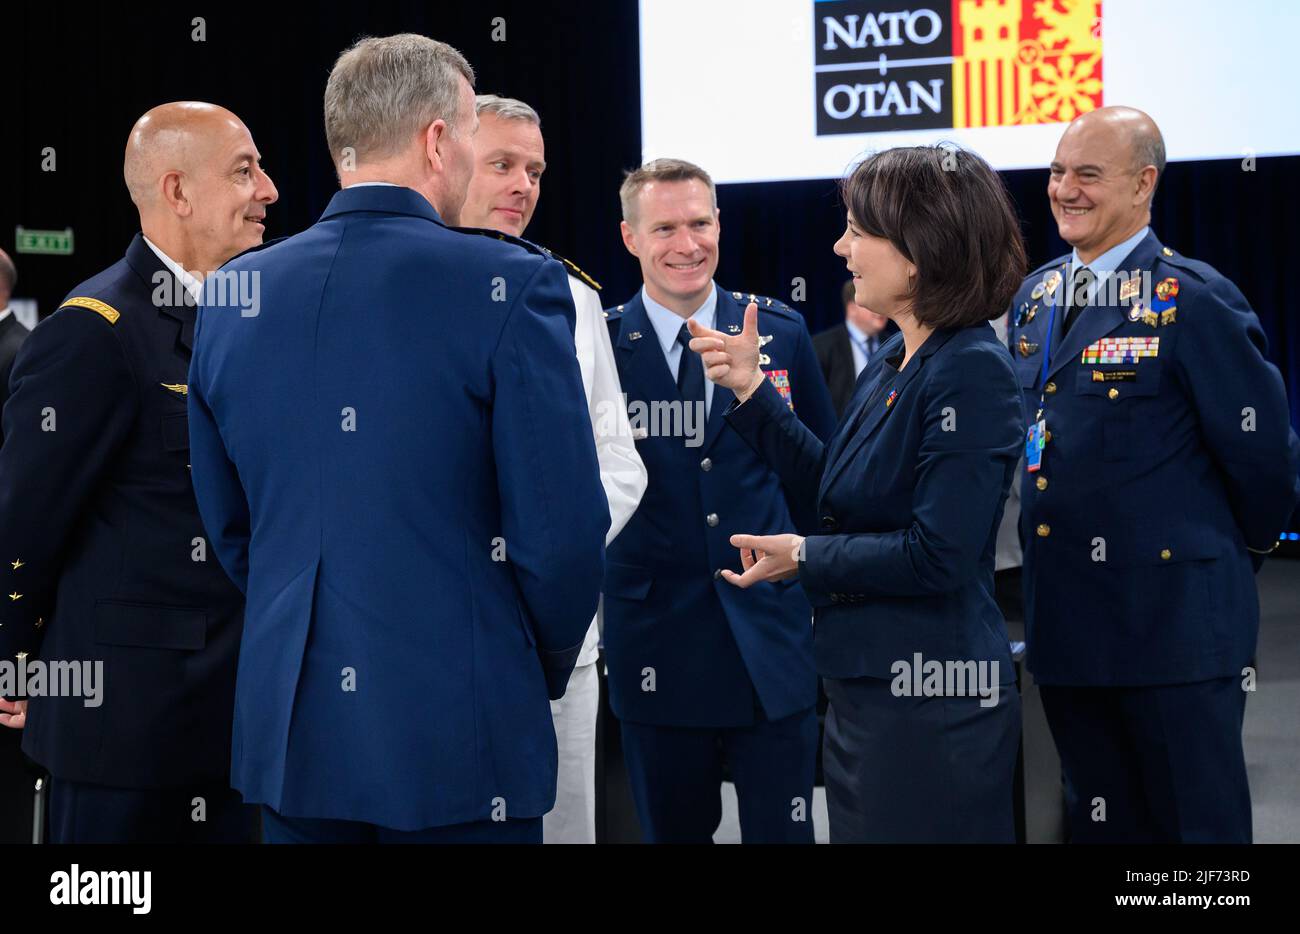 30 June 2022, Spain, Madrid: Annalena Baerbock (2nd from right, Bündnis 90/Die Grünen), Foreign Minister, talks with the highest-ranking Nato generals (l-r), General Philippe Lavigne, Supreme Allied Commander Transformation (Sact), General Tod D. Wolters, Supreme Allied Commander Europe (SACEUR), Admiral Rob Bauer, Chair of the Nato Military Committee, Lieutenant General Landrum, Deputy Chair of the Nato Military Committee, and Major General Lucas Muñoz Bronchales, SACT Representative in Europe. At the two-day summit, the heads of state and government of the 30 alliance countries took decision Stock Photo